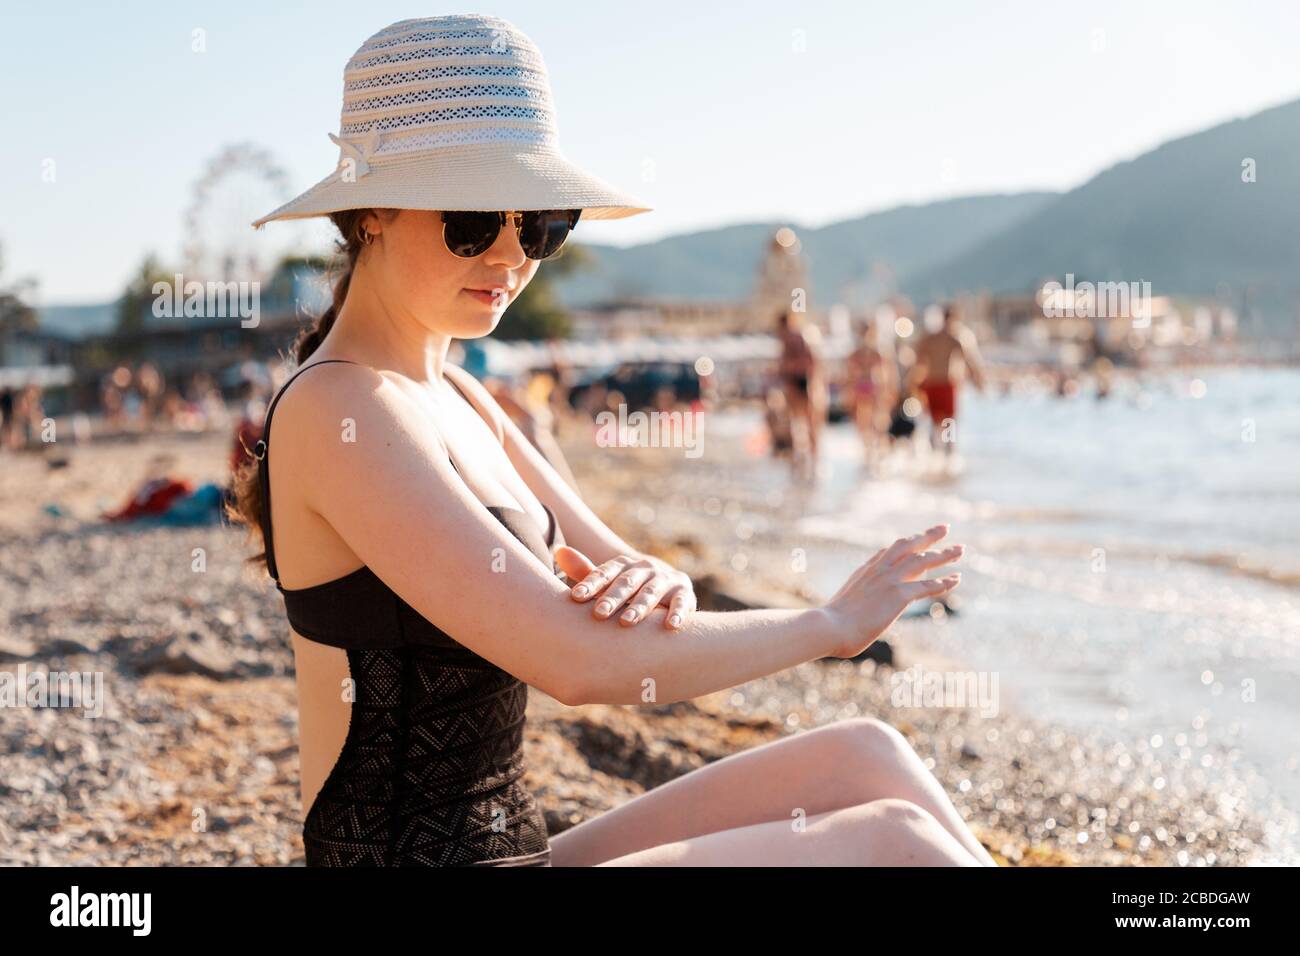 https://c8.alamy.com/comp/2CBDGAW/a-woman-in-a-straw-hat-and-glasses-smears-sunscreen-sitting-on-the-beach-the-concept-of-proper-tanning-2CBDGAW.jpg